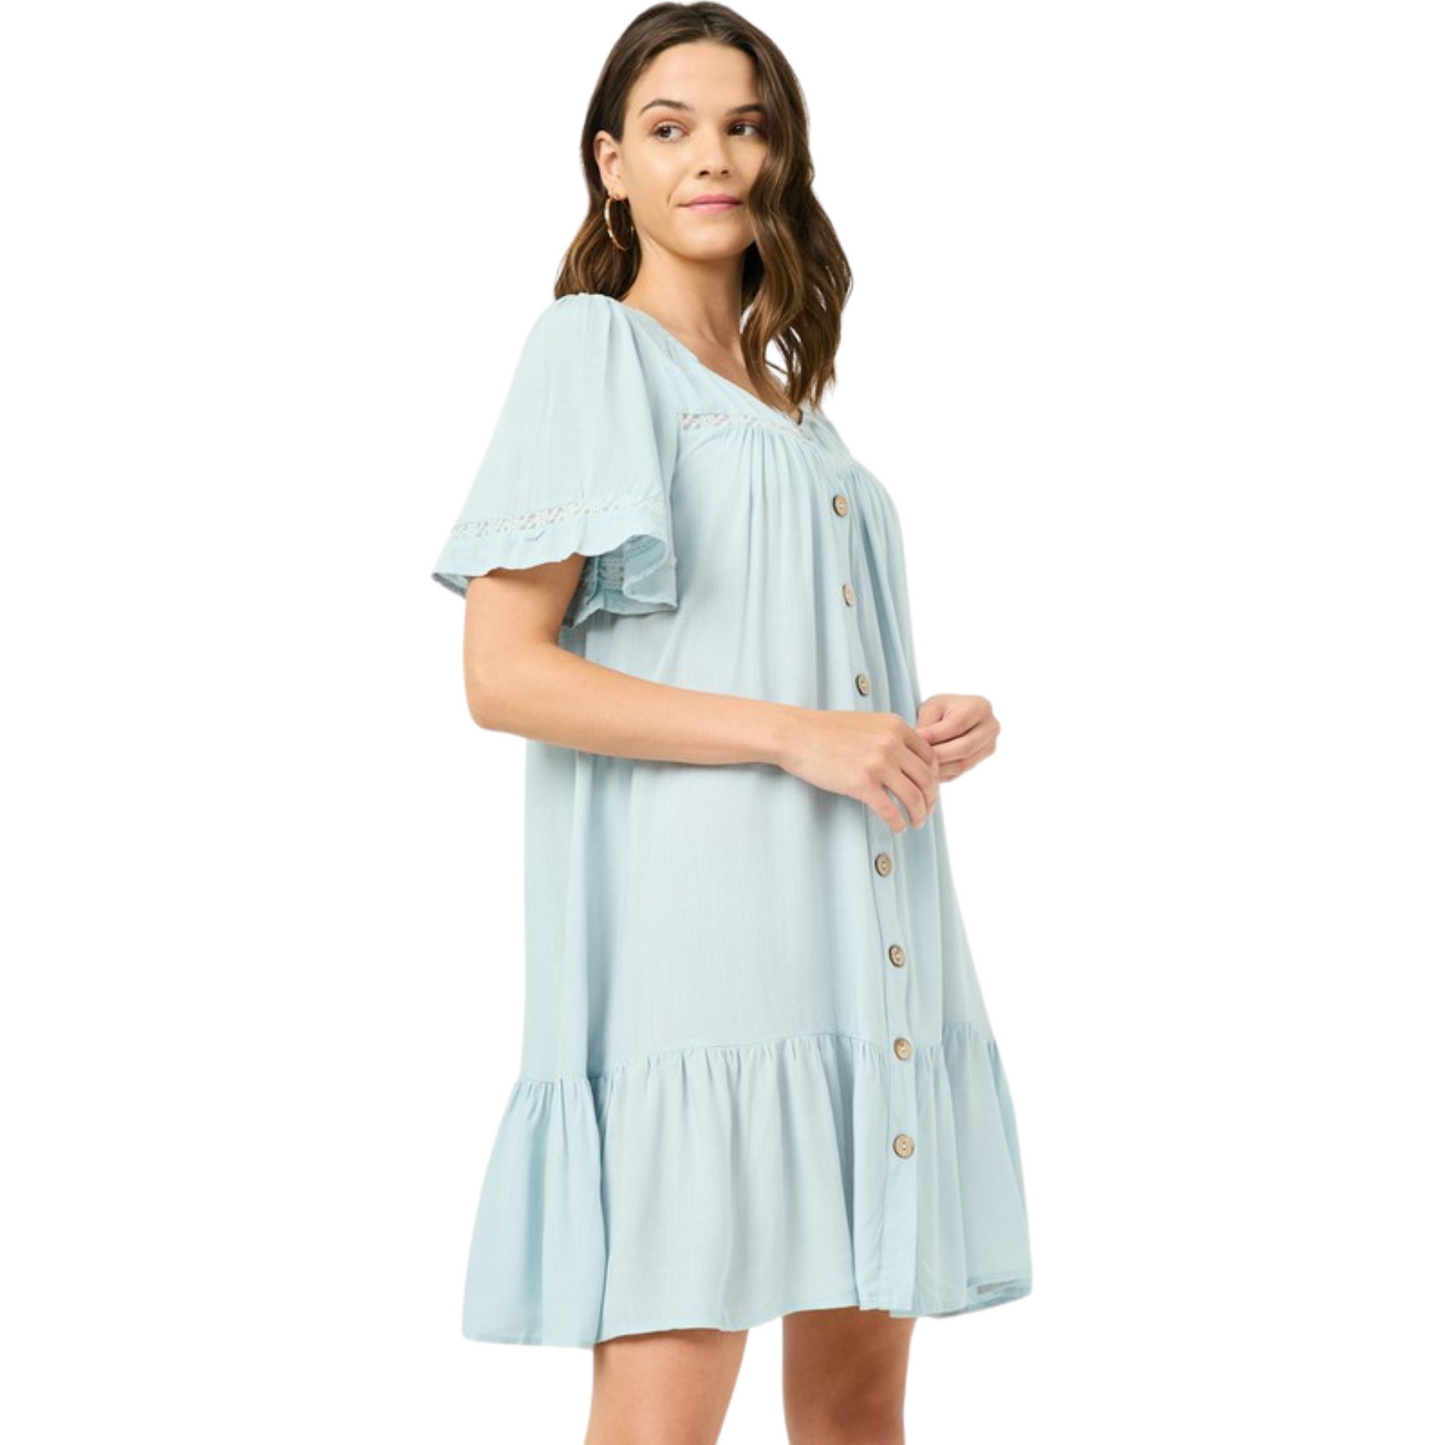 This Lace Trimmed Dress is an ideal choice when you want to look stylish while remaining comfortable. The lightweight material is breathable and brings a refreshing look to the light blue color. The mini dress style ensures you look trendy and fashion-forward.